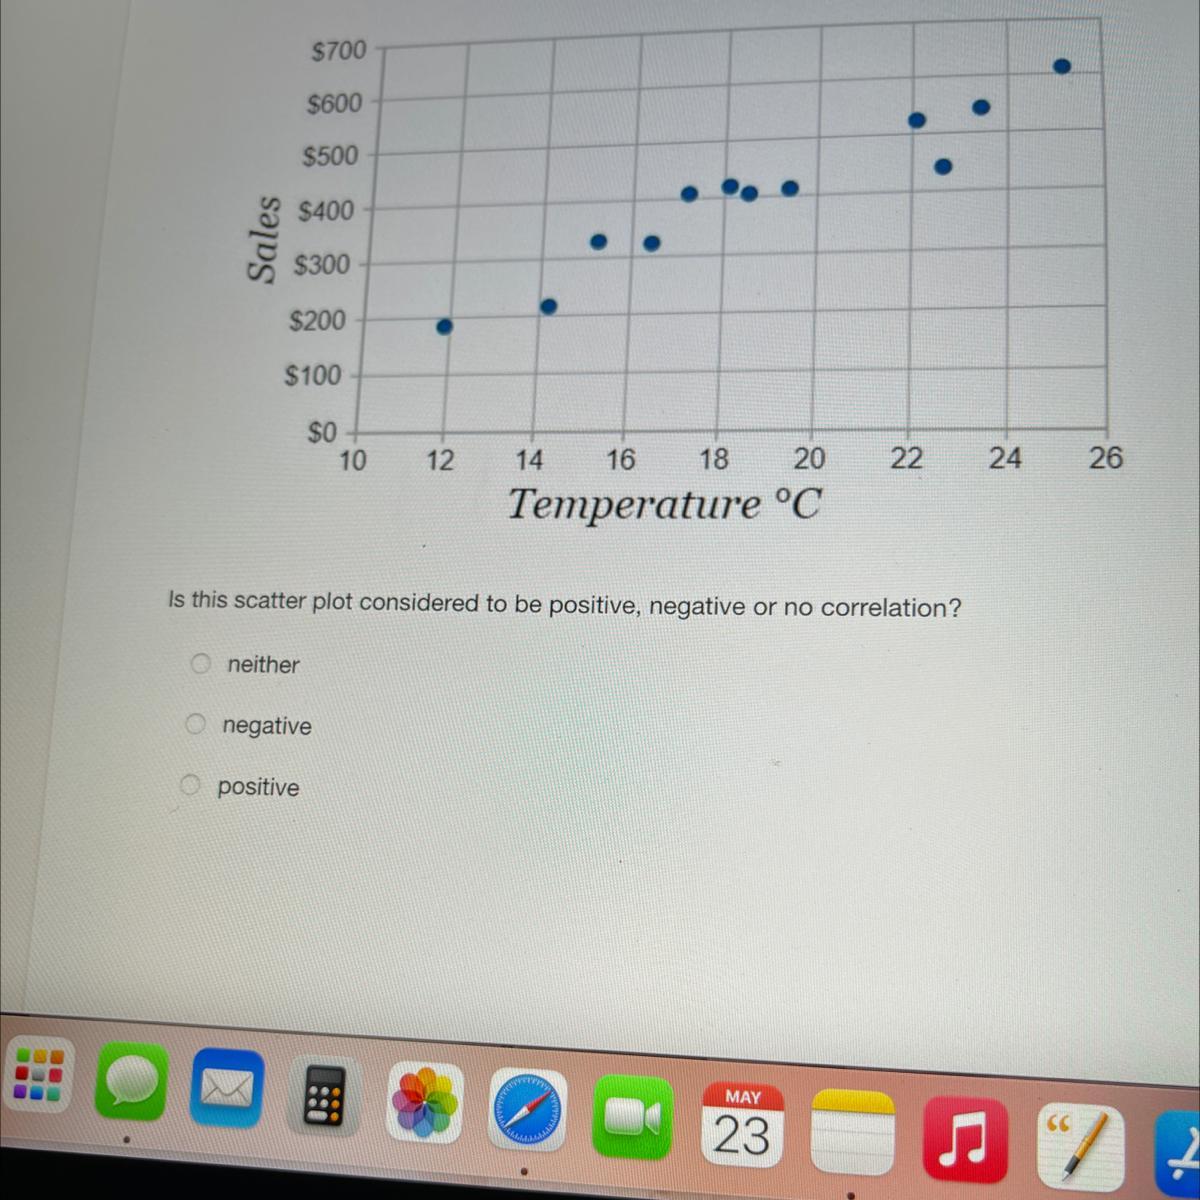 Temperature CIs This Scatter Plot Considered To Be Positive, Negative Or No Correlation?neithero Negativepositive